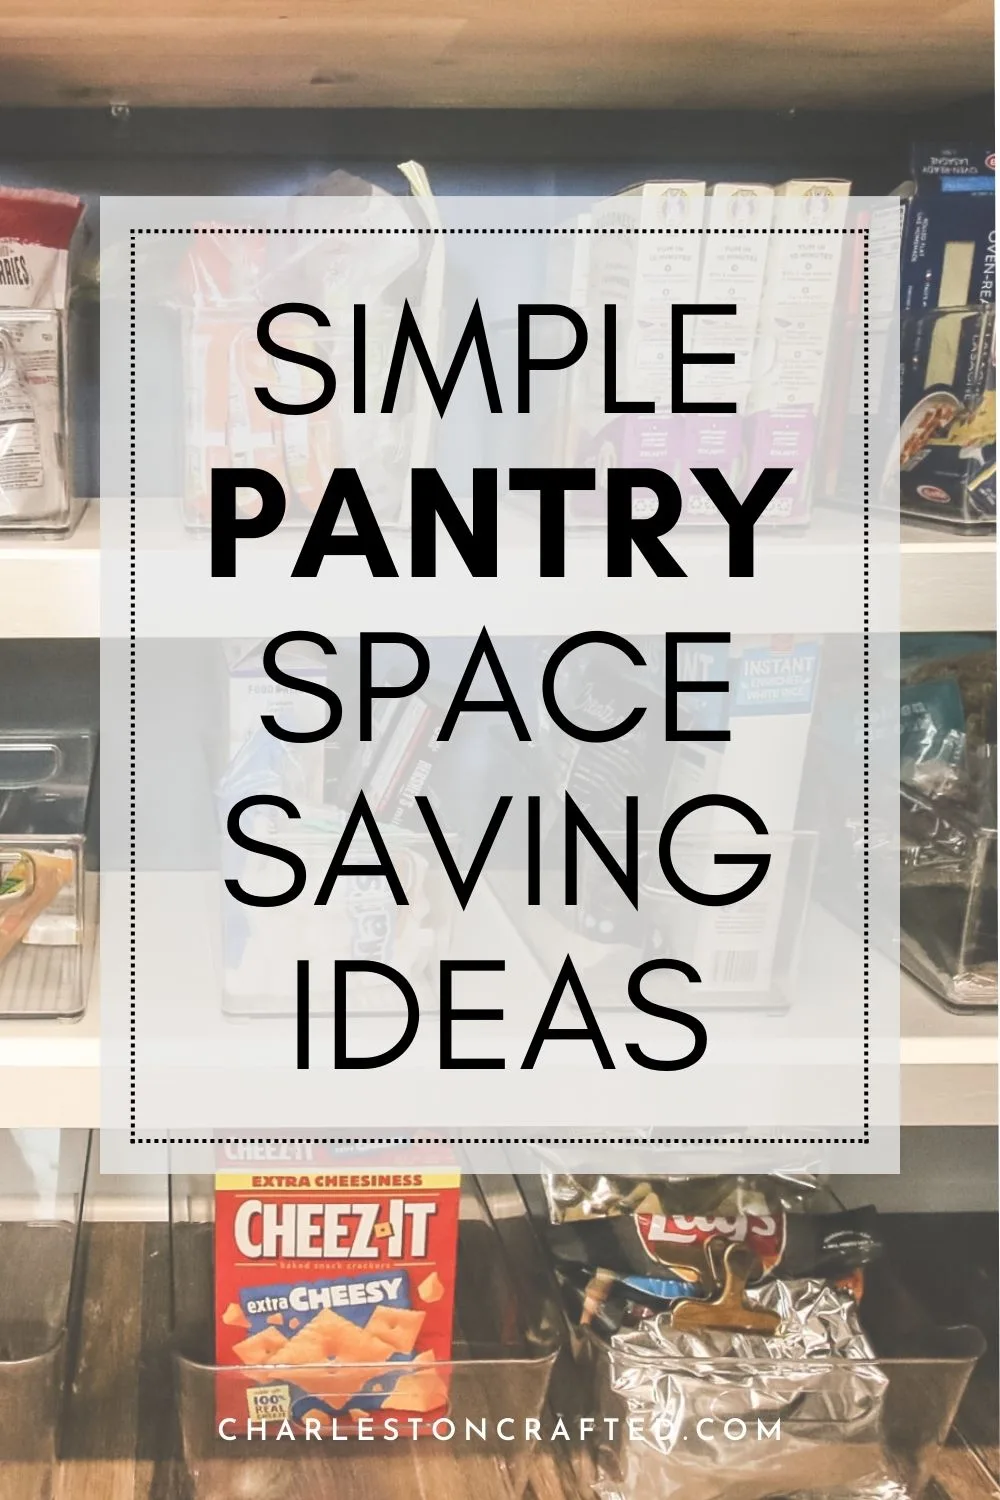 Smart and Simple Pantry space saving ideas